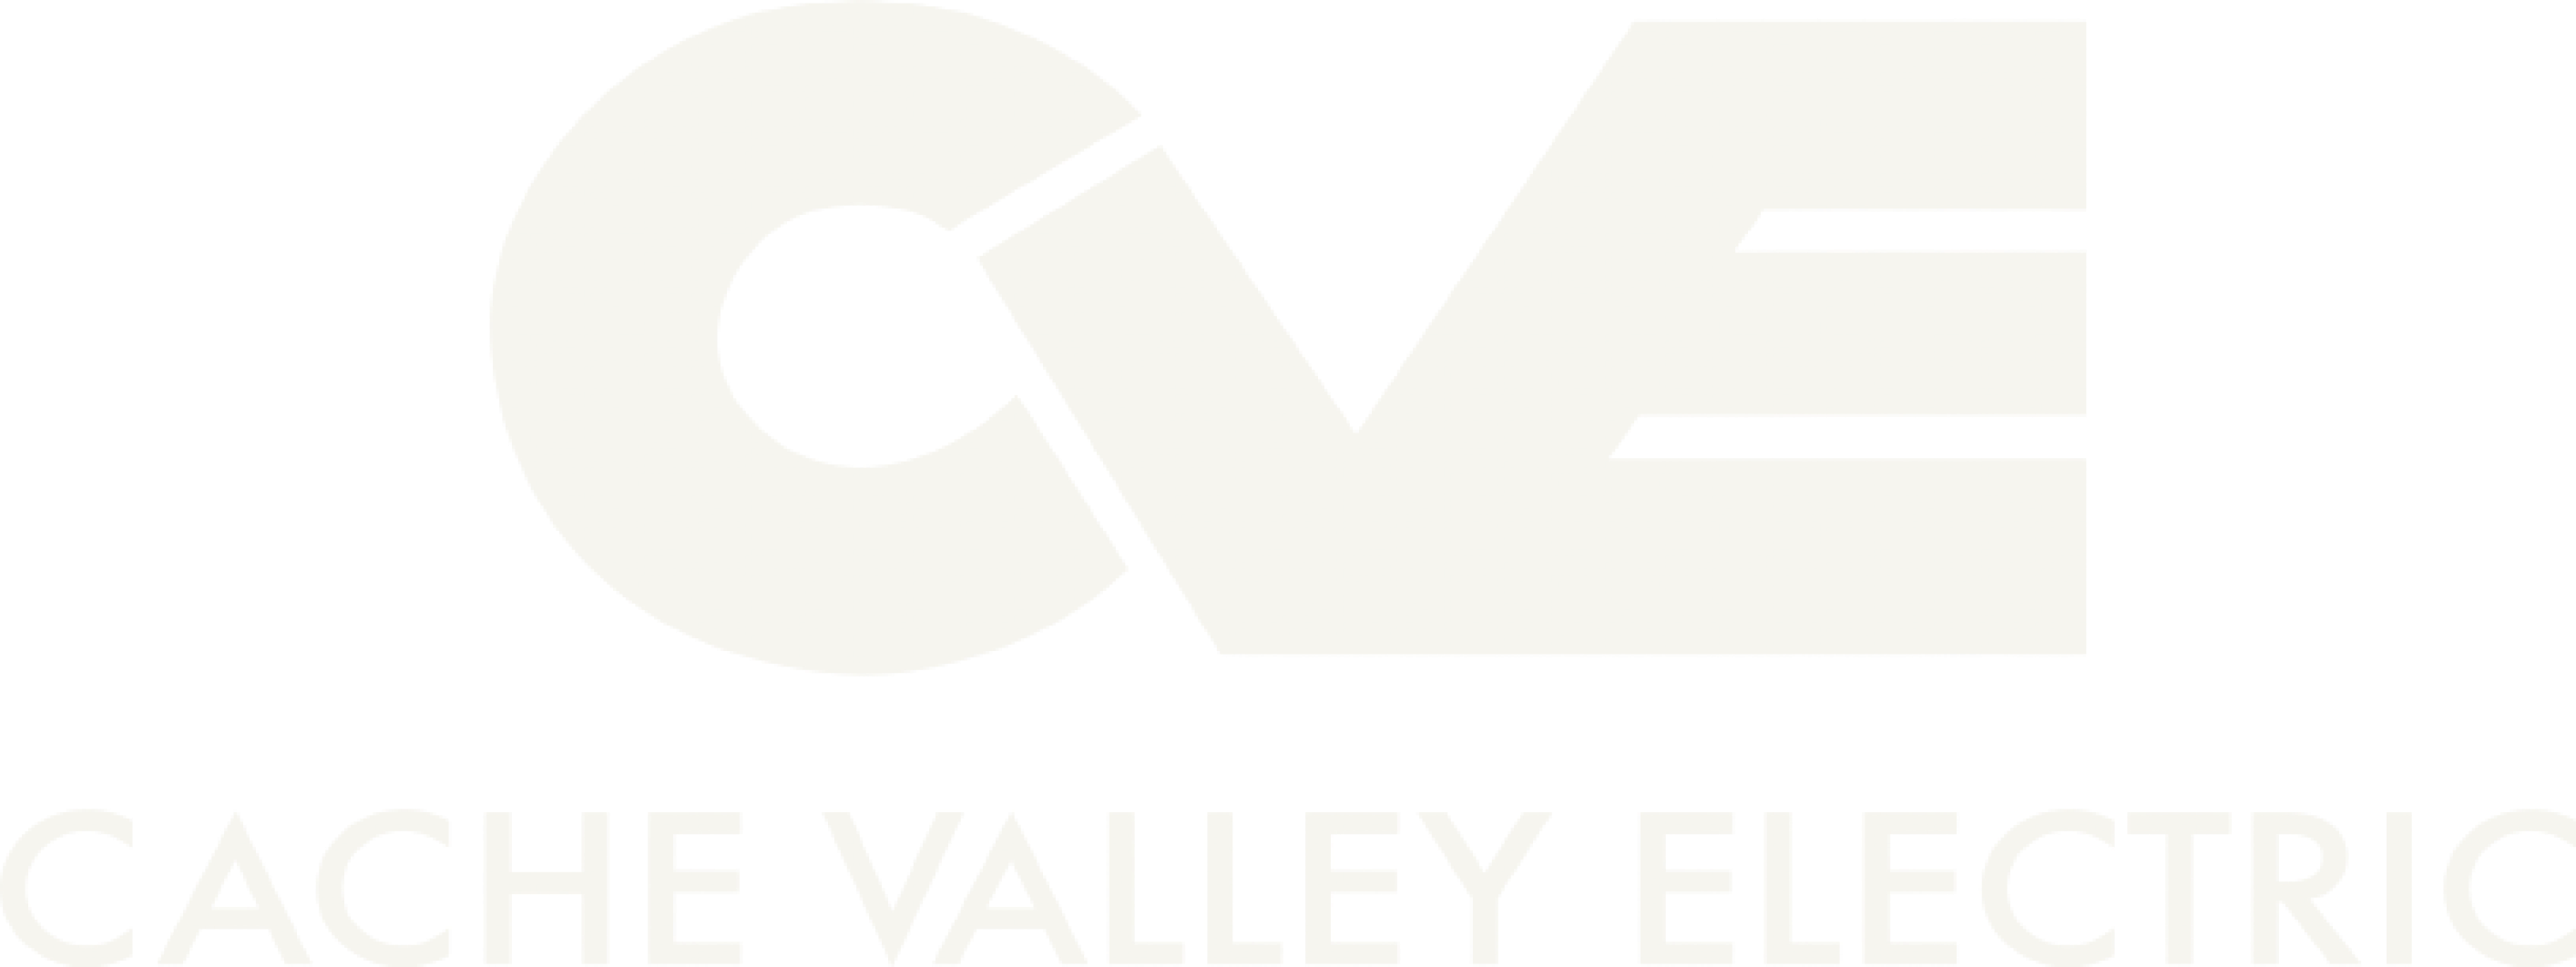 Cache Valley Electric